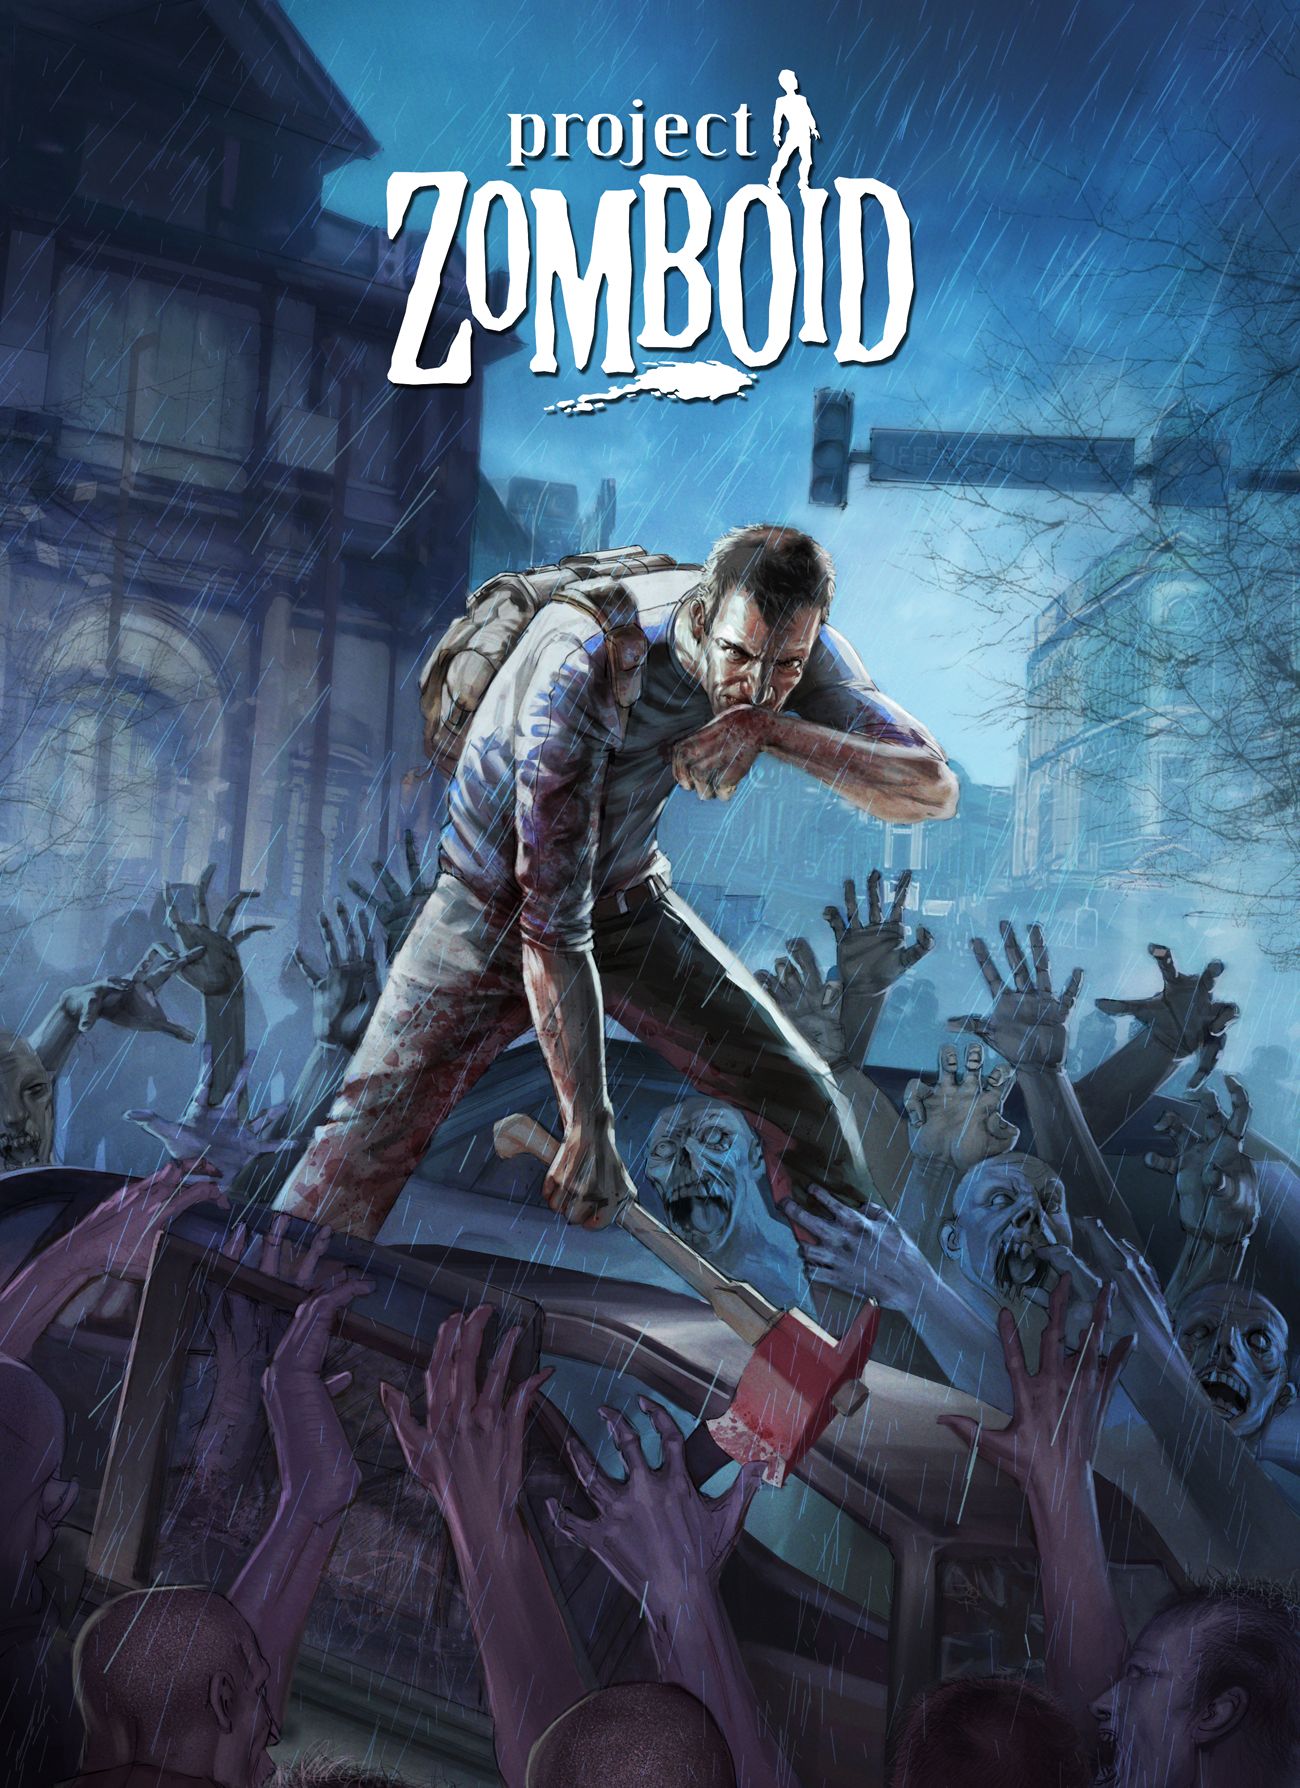 Project Zomboid: Project Zomboid is an open world survival horror video game in alpha stage development by independent developer The Indie Stone. Platforms: Mic